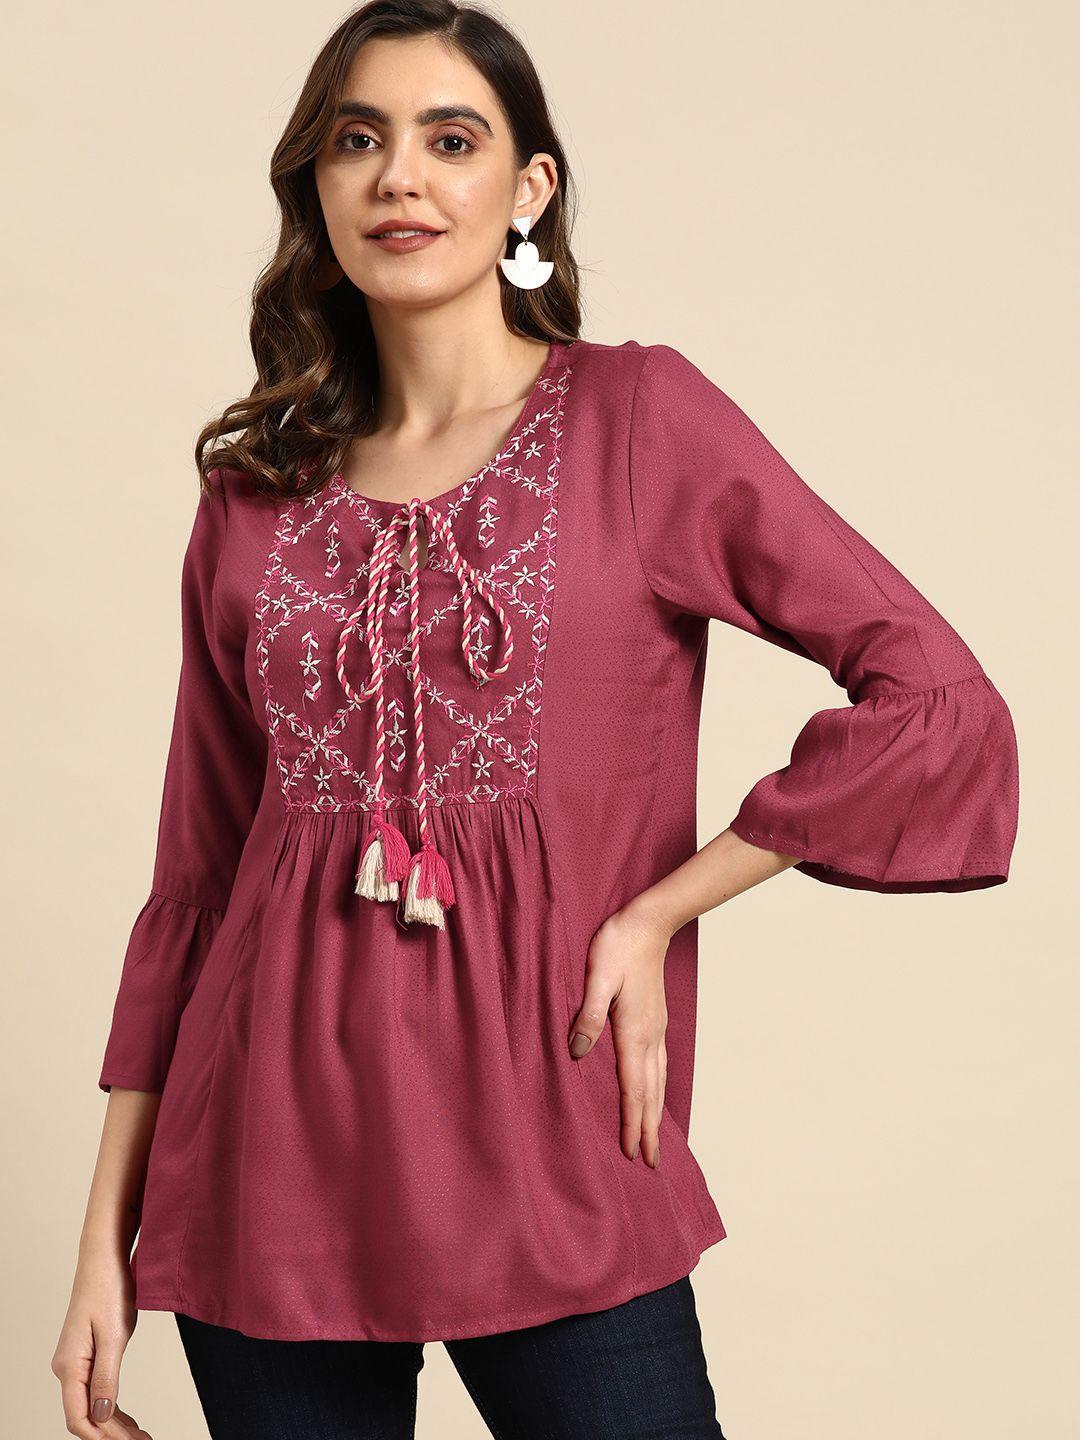 all about you woven design tie-up neck bell sleeves kurti with embroidered yoke